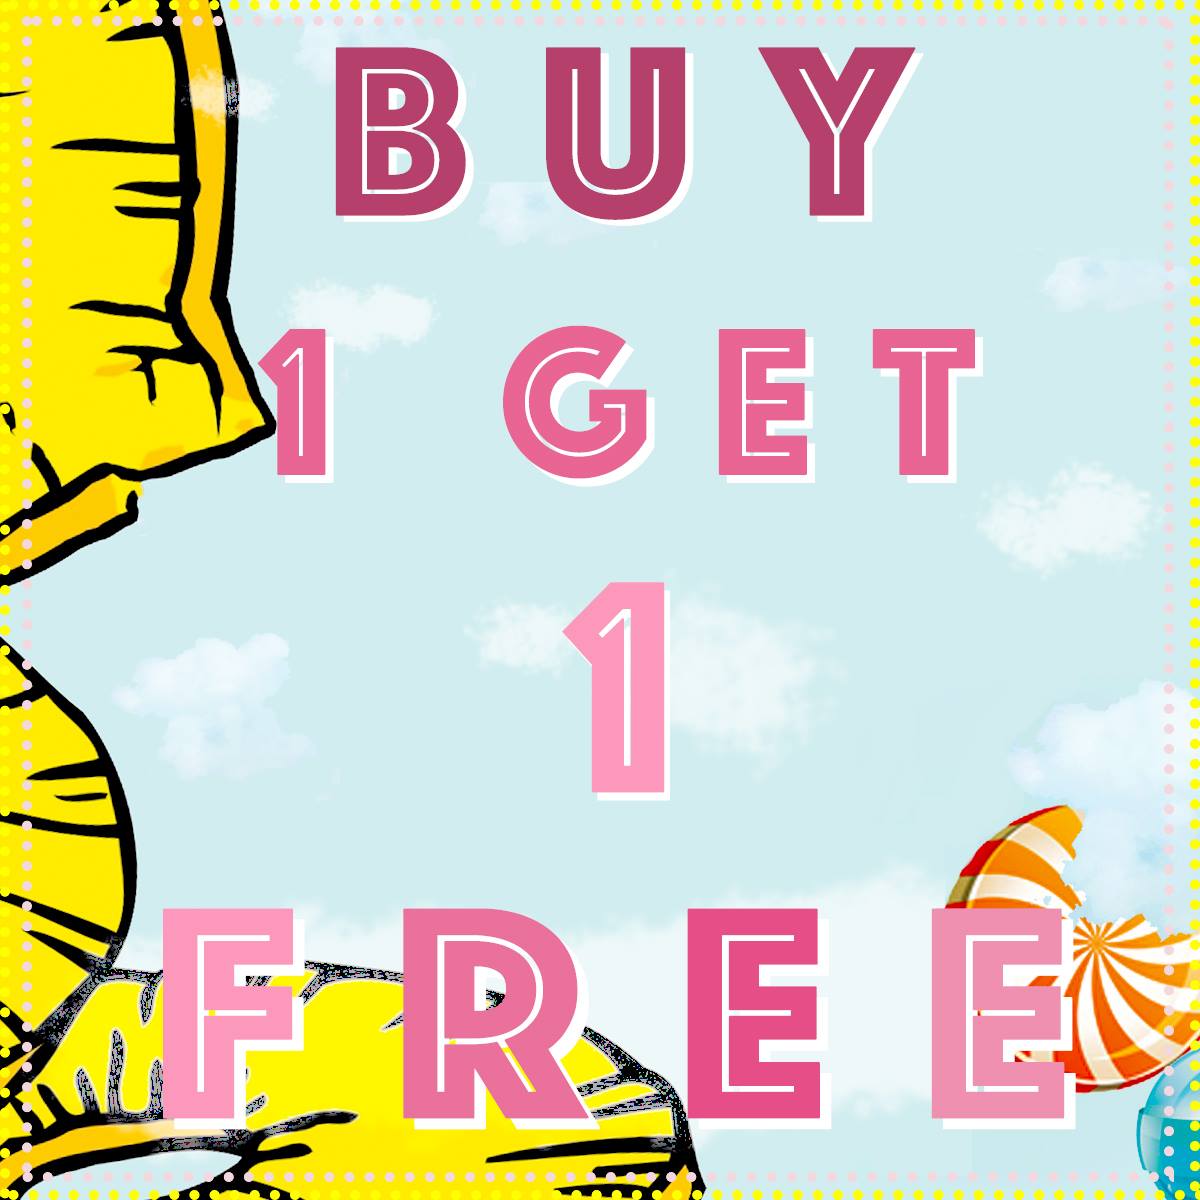 Dressabelle Singapore Buy 1 Get 1 FREE Promotion 27 to 28 Aug 2016